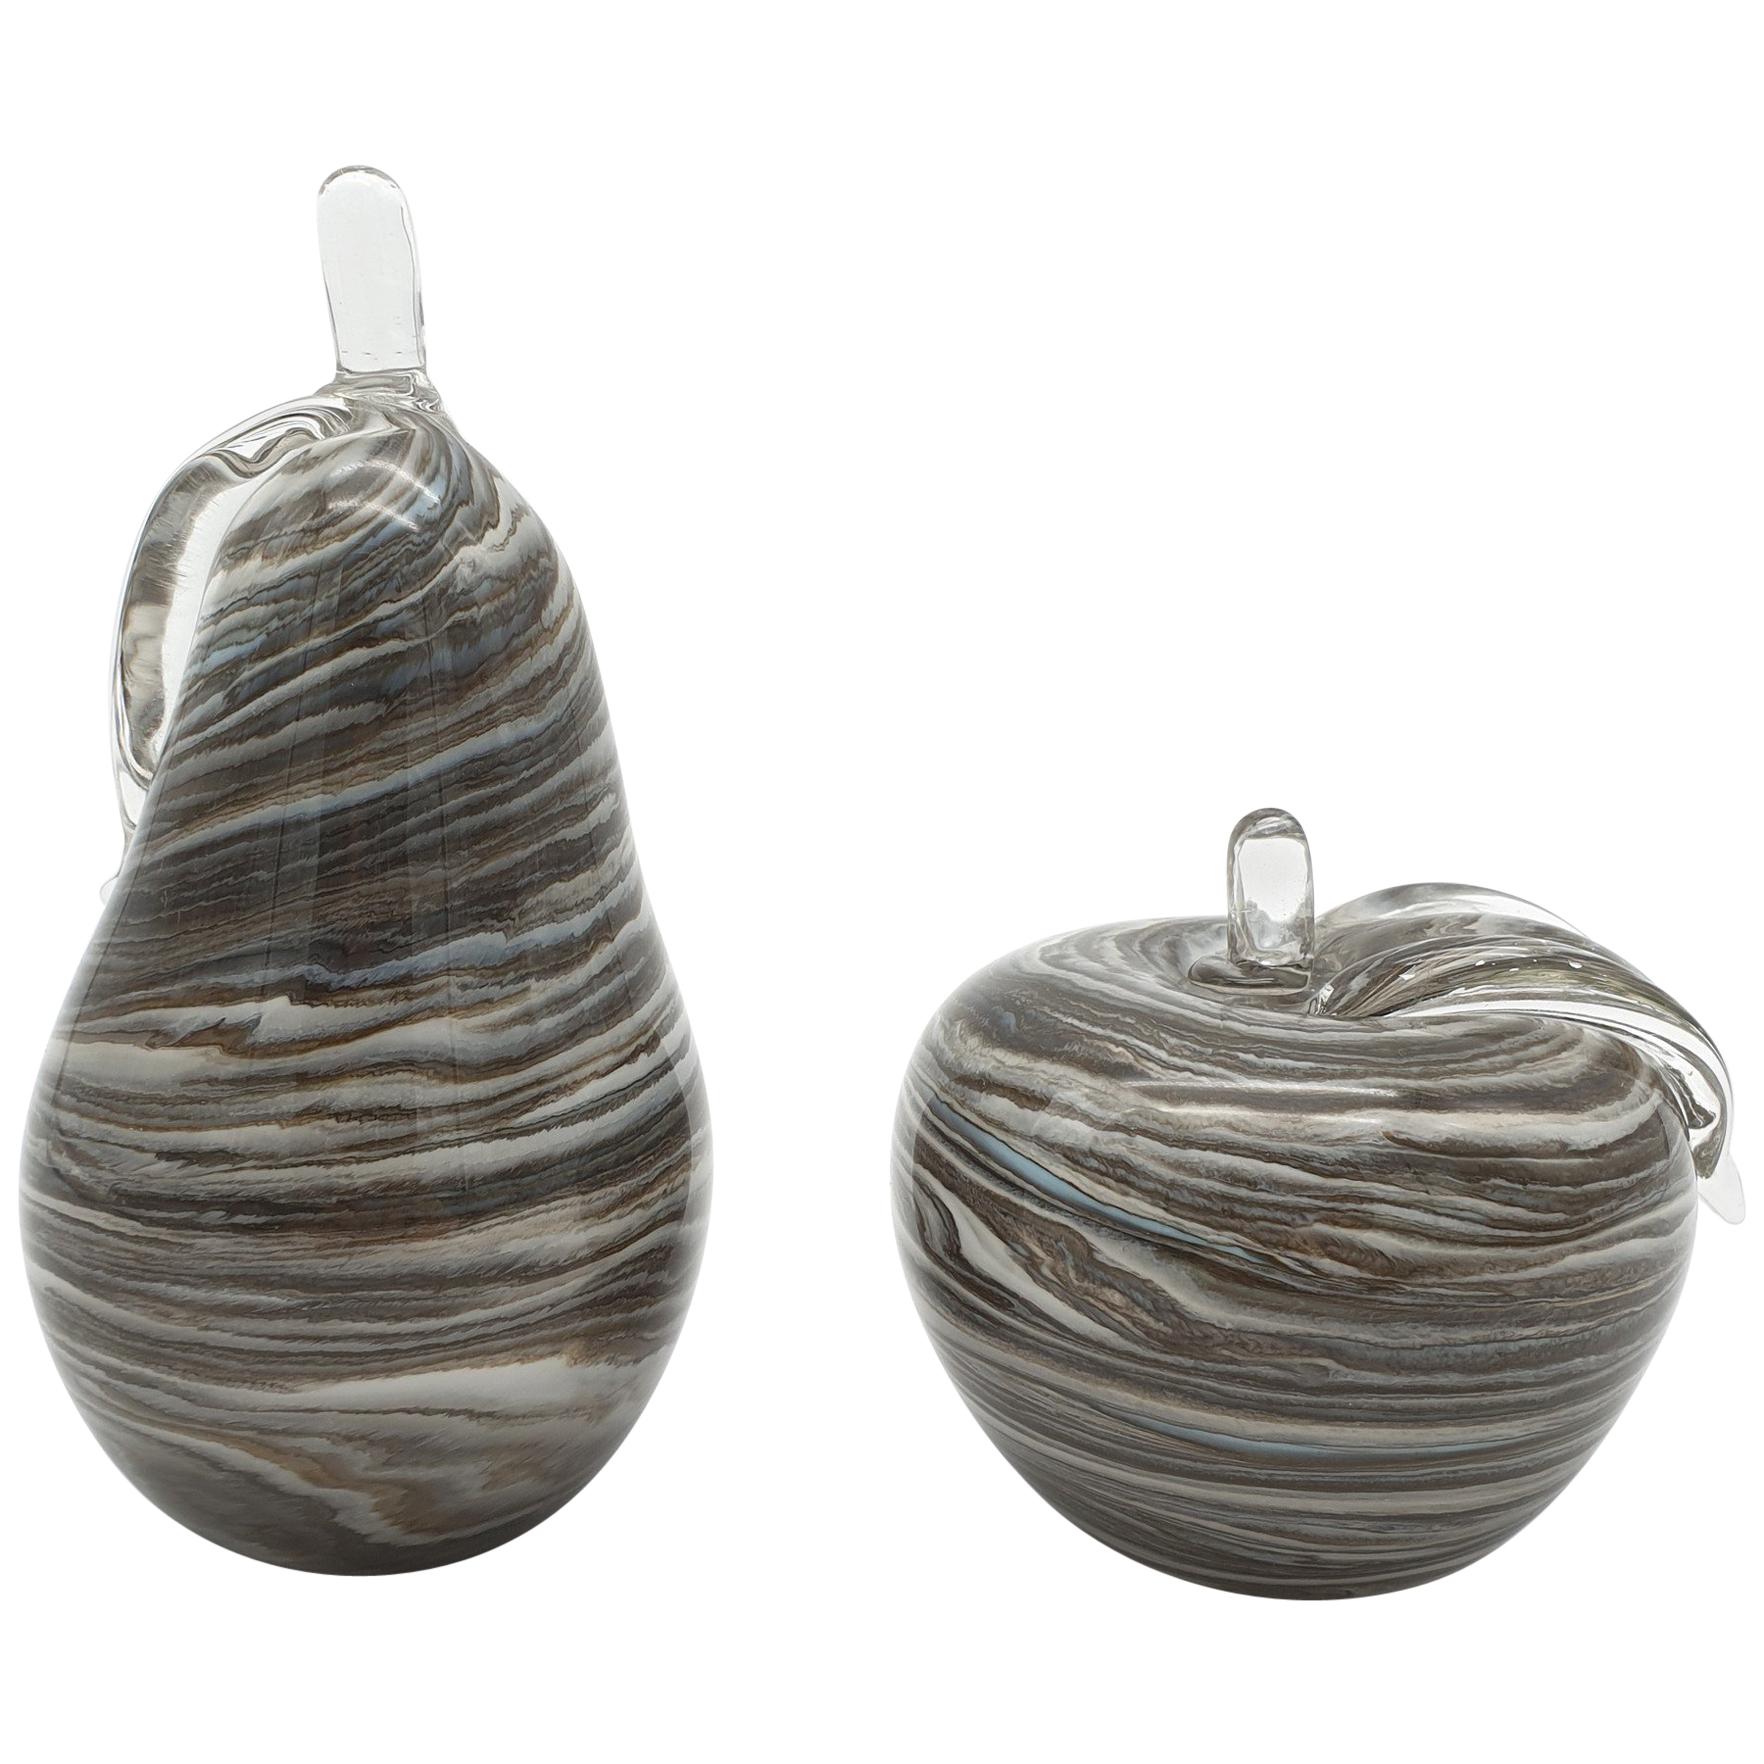 Modern Murano Glass Decorative Apple and Pear, Marbled Gray Color, late 1990s For Sale